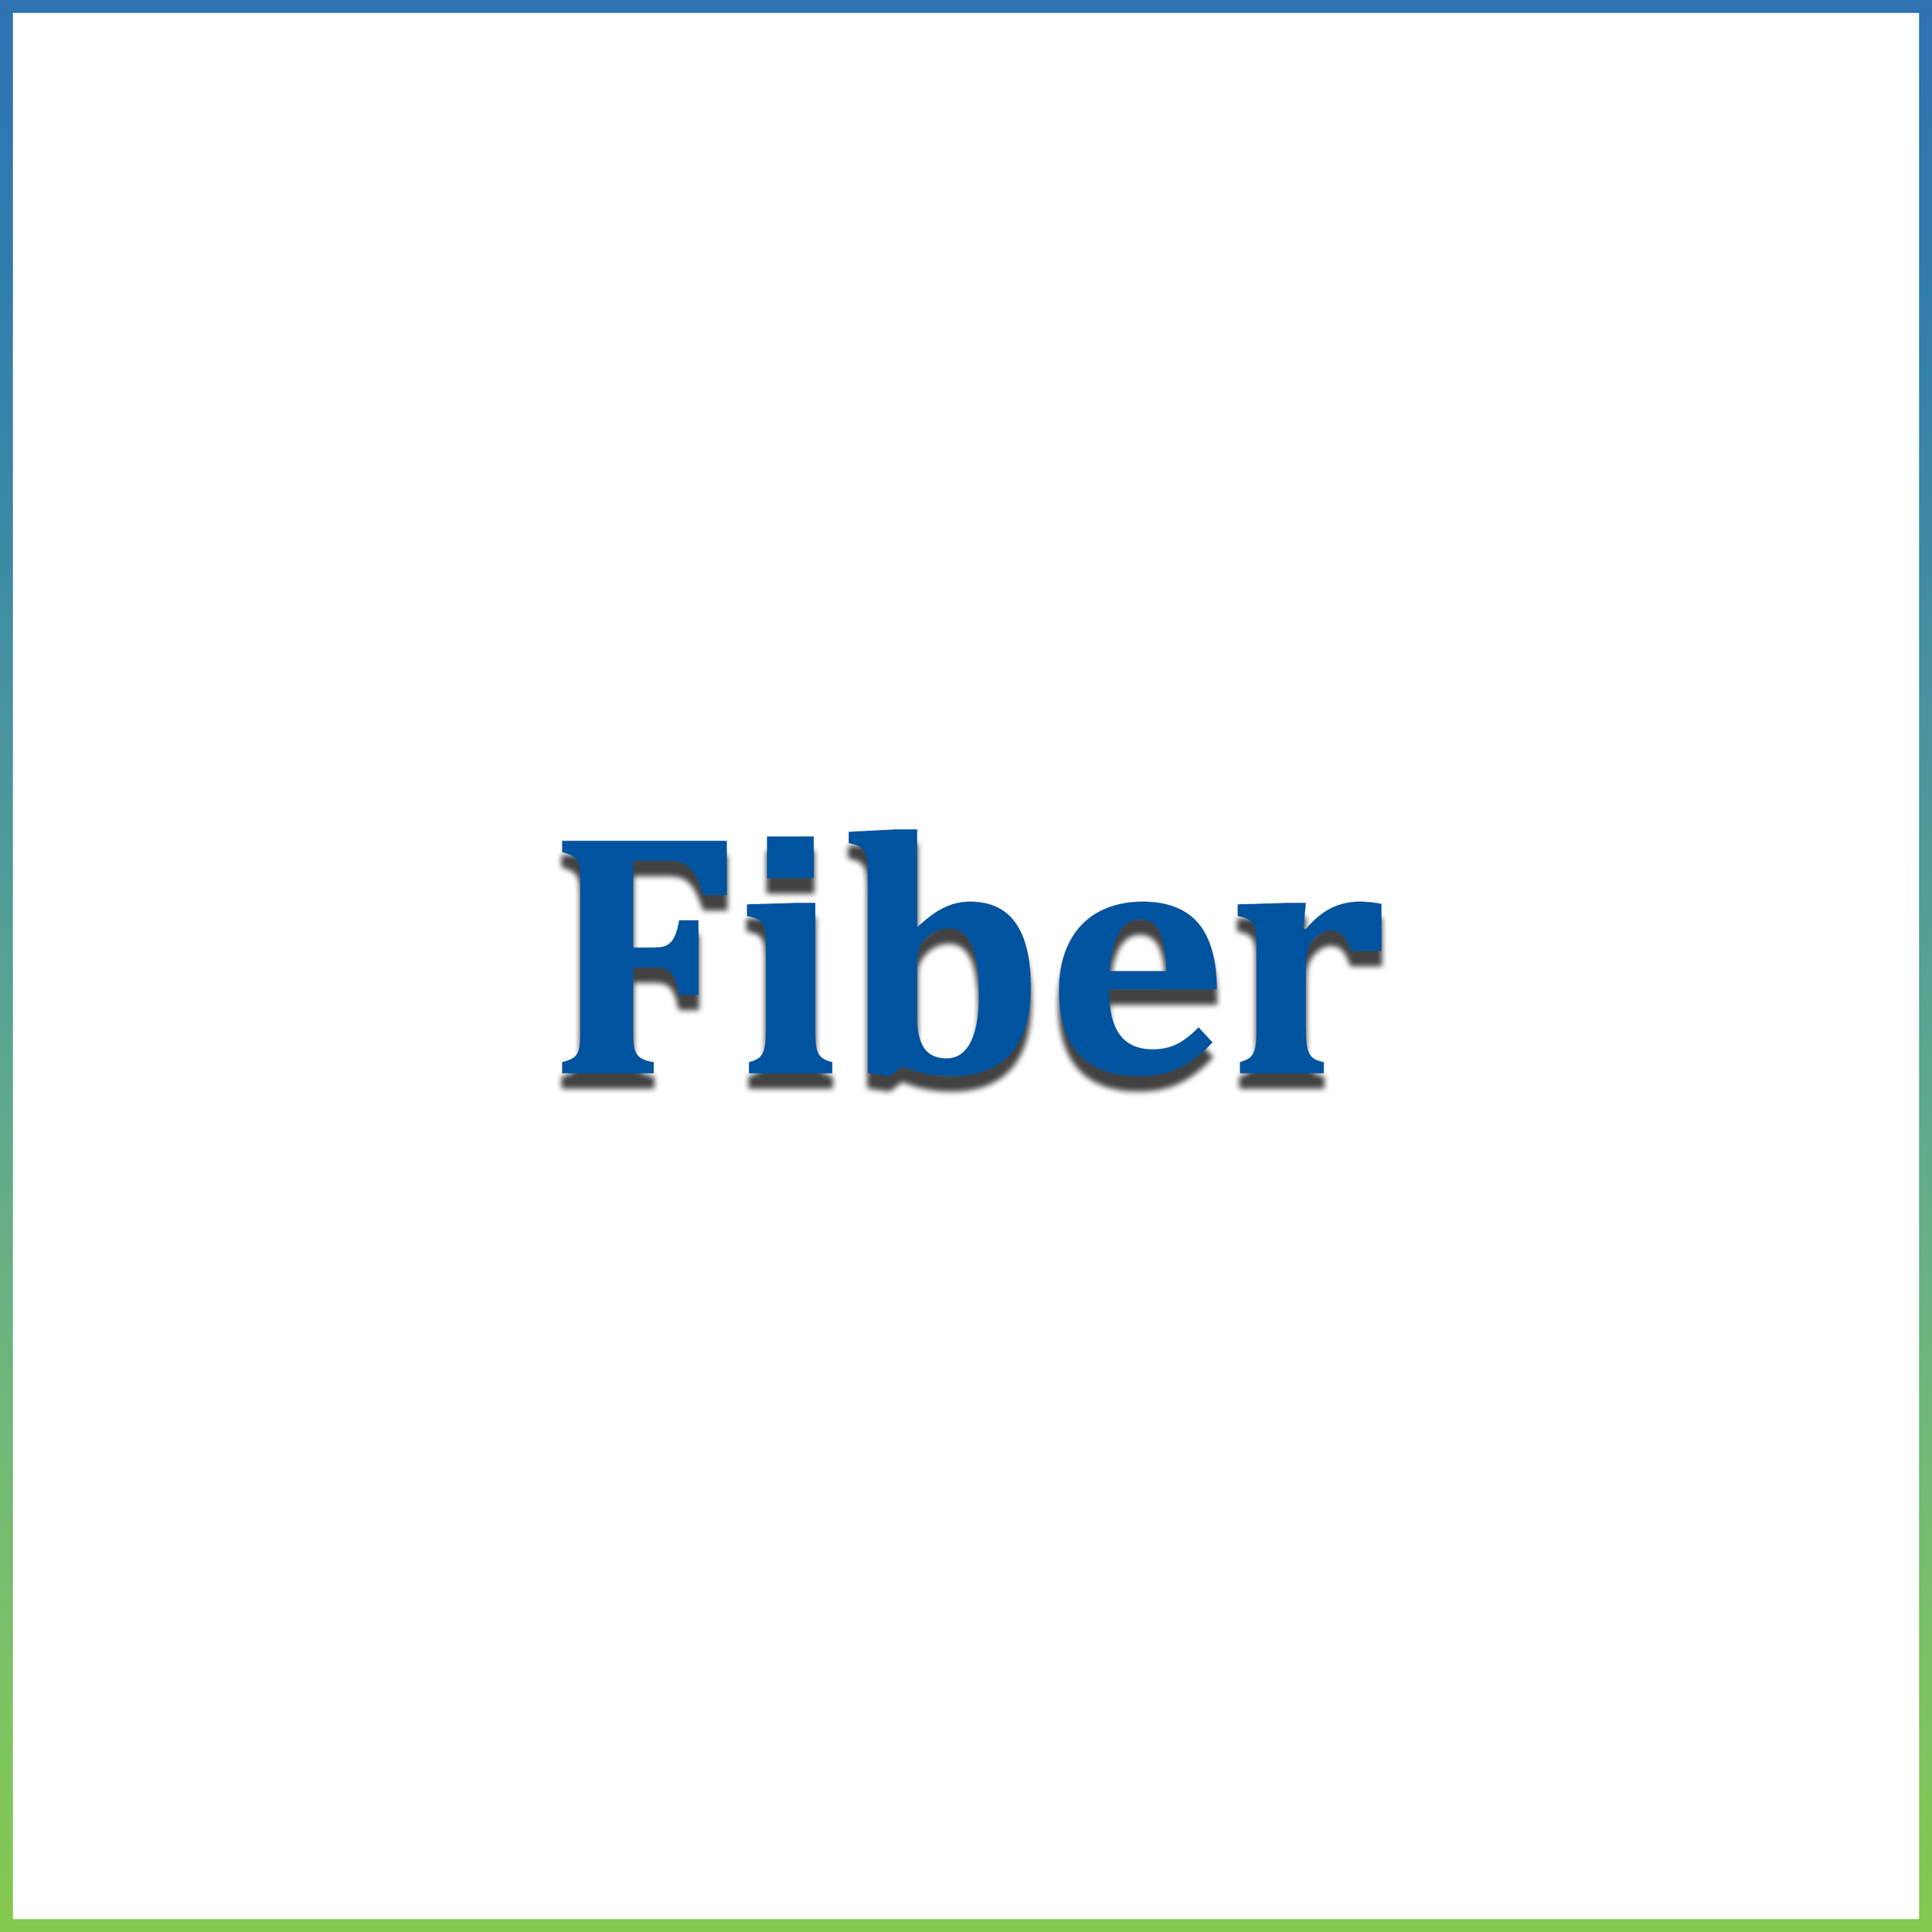 Product Page (Fiber).png